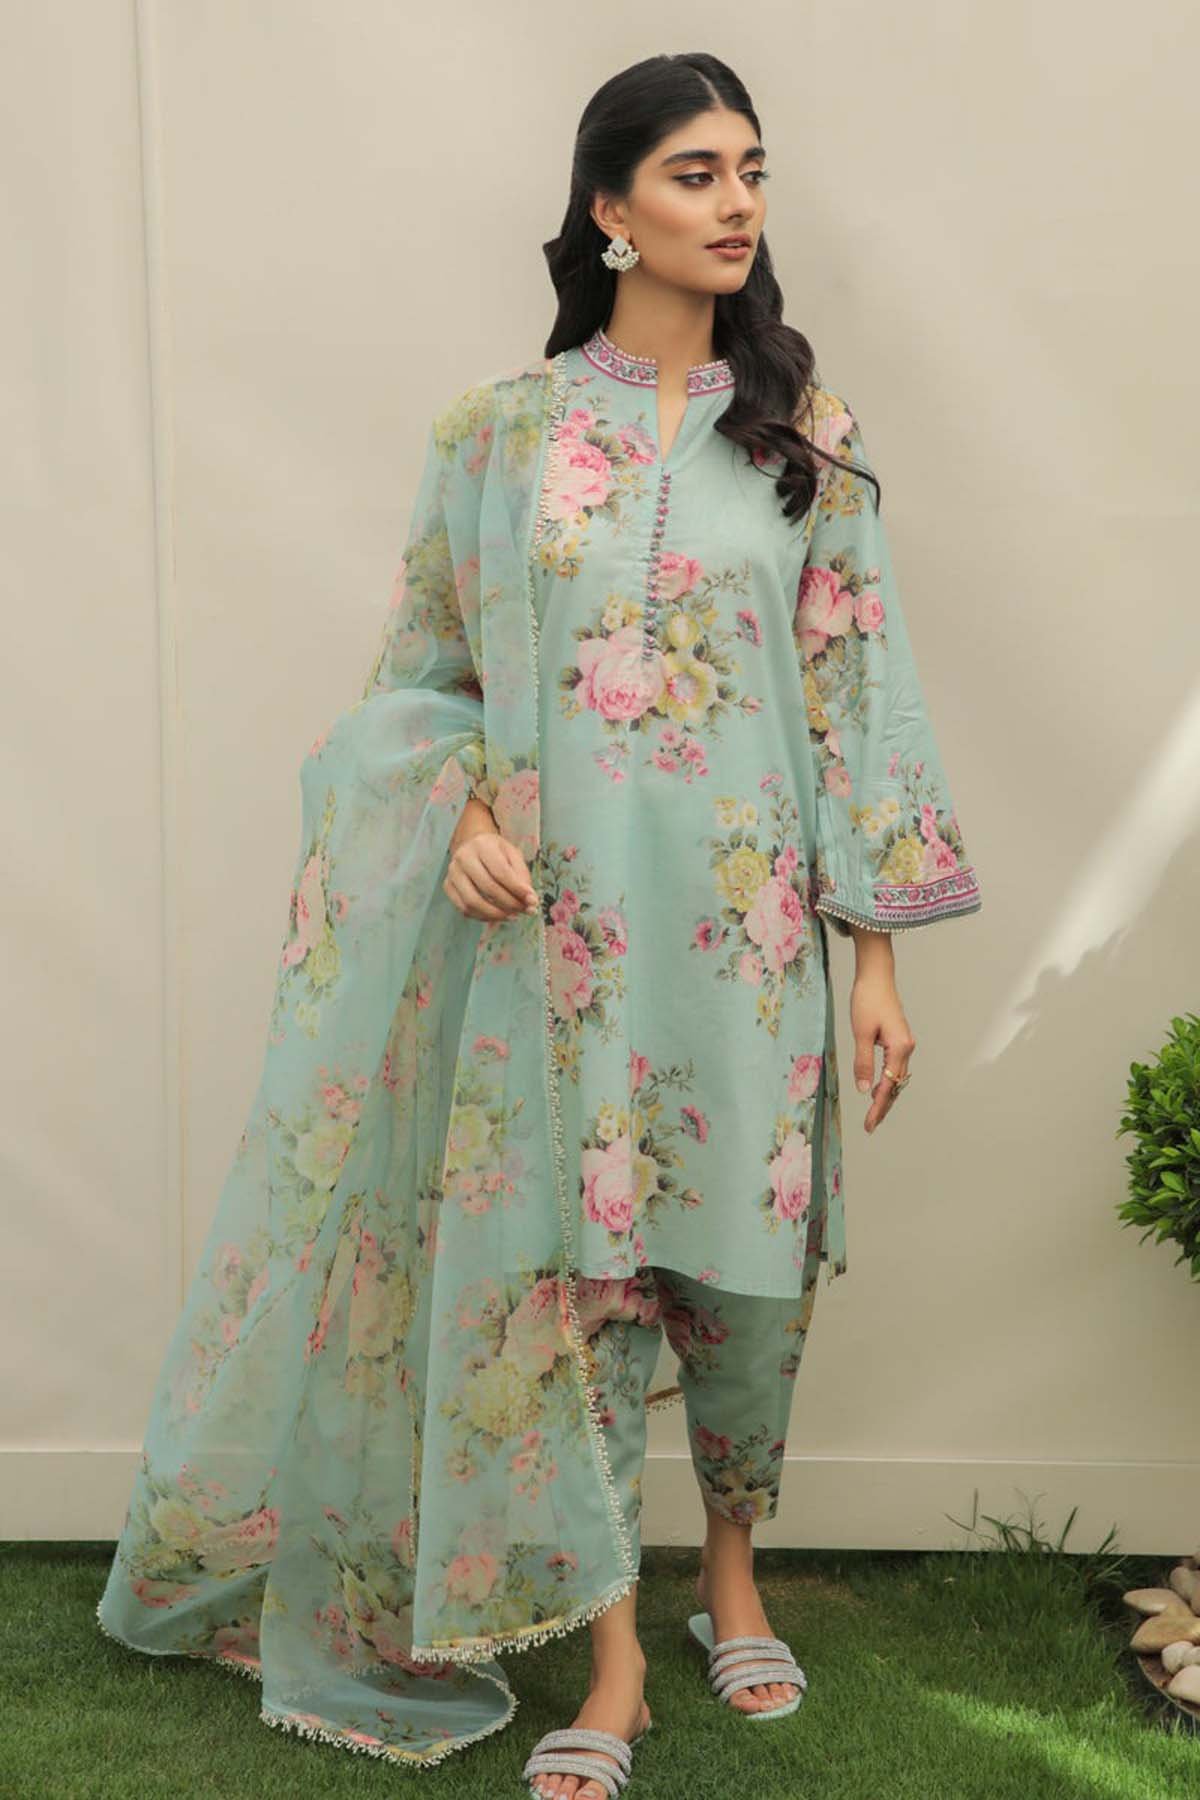 Baroque women new dress design empires collection pakistan top brand clothing brand fashion 3 piece suit